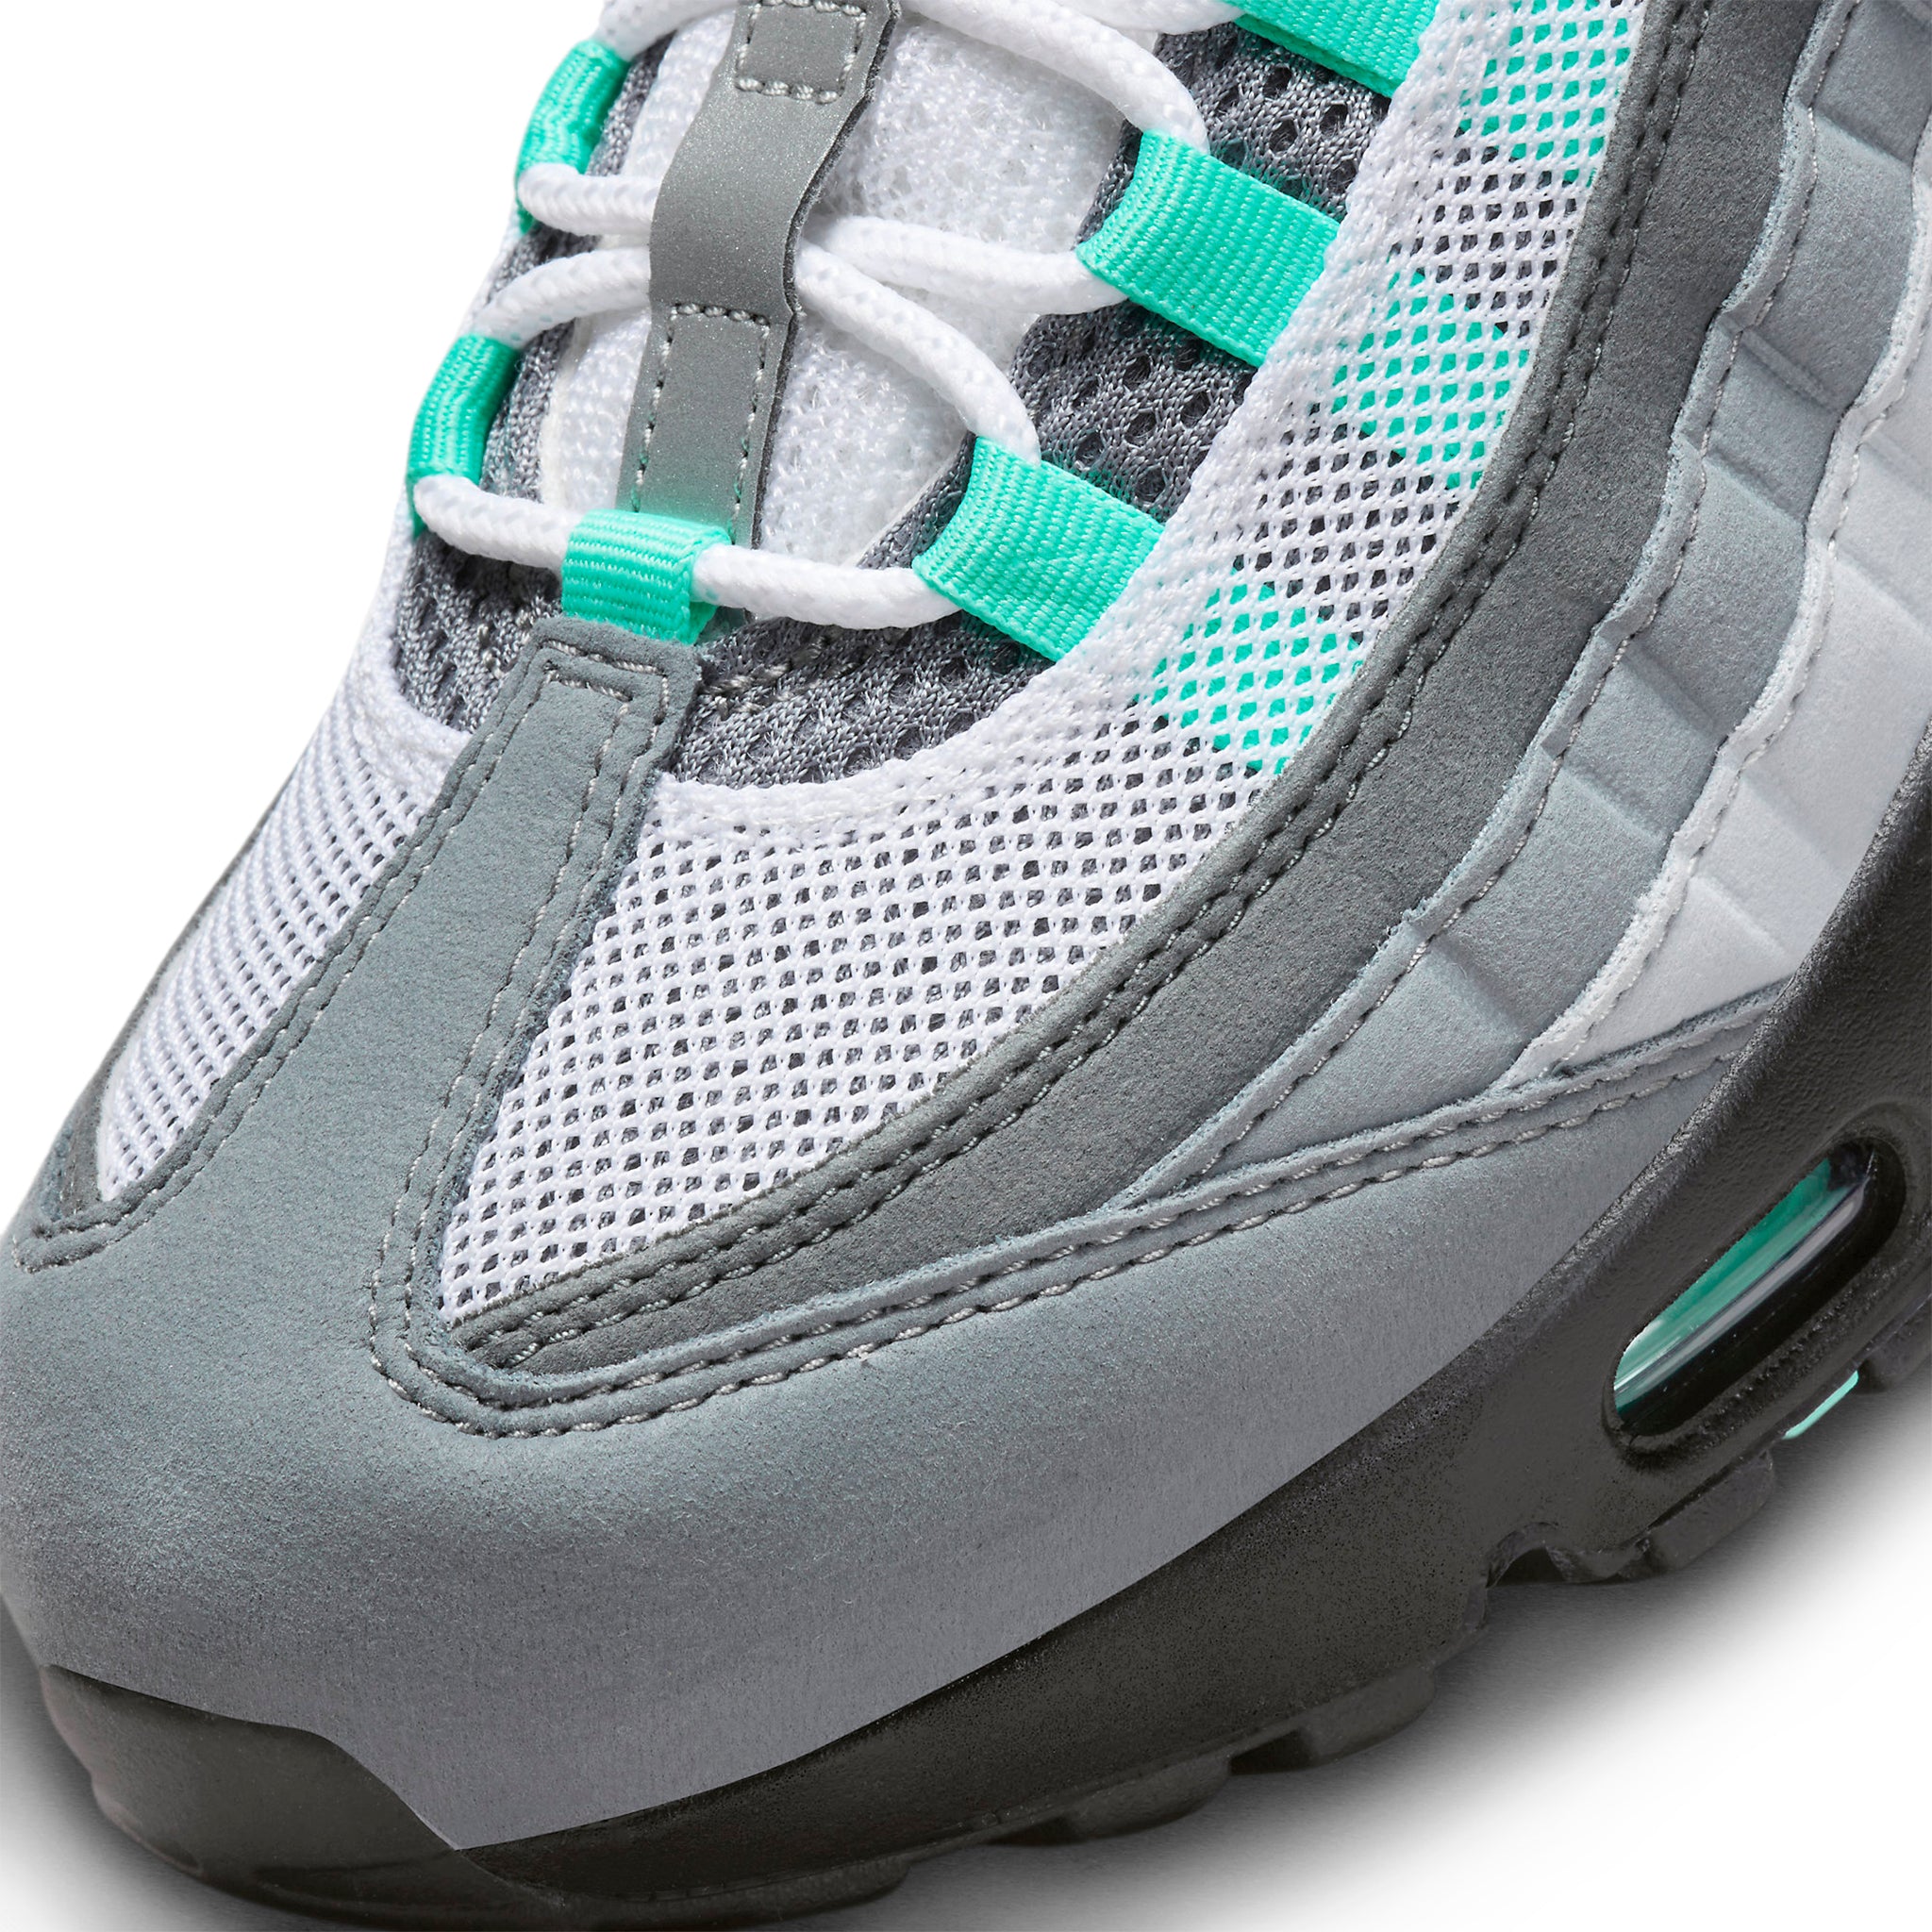 Toe box view of Nike Air Max 95 Hyper Turquoise FV4710-100